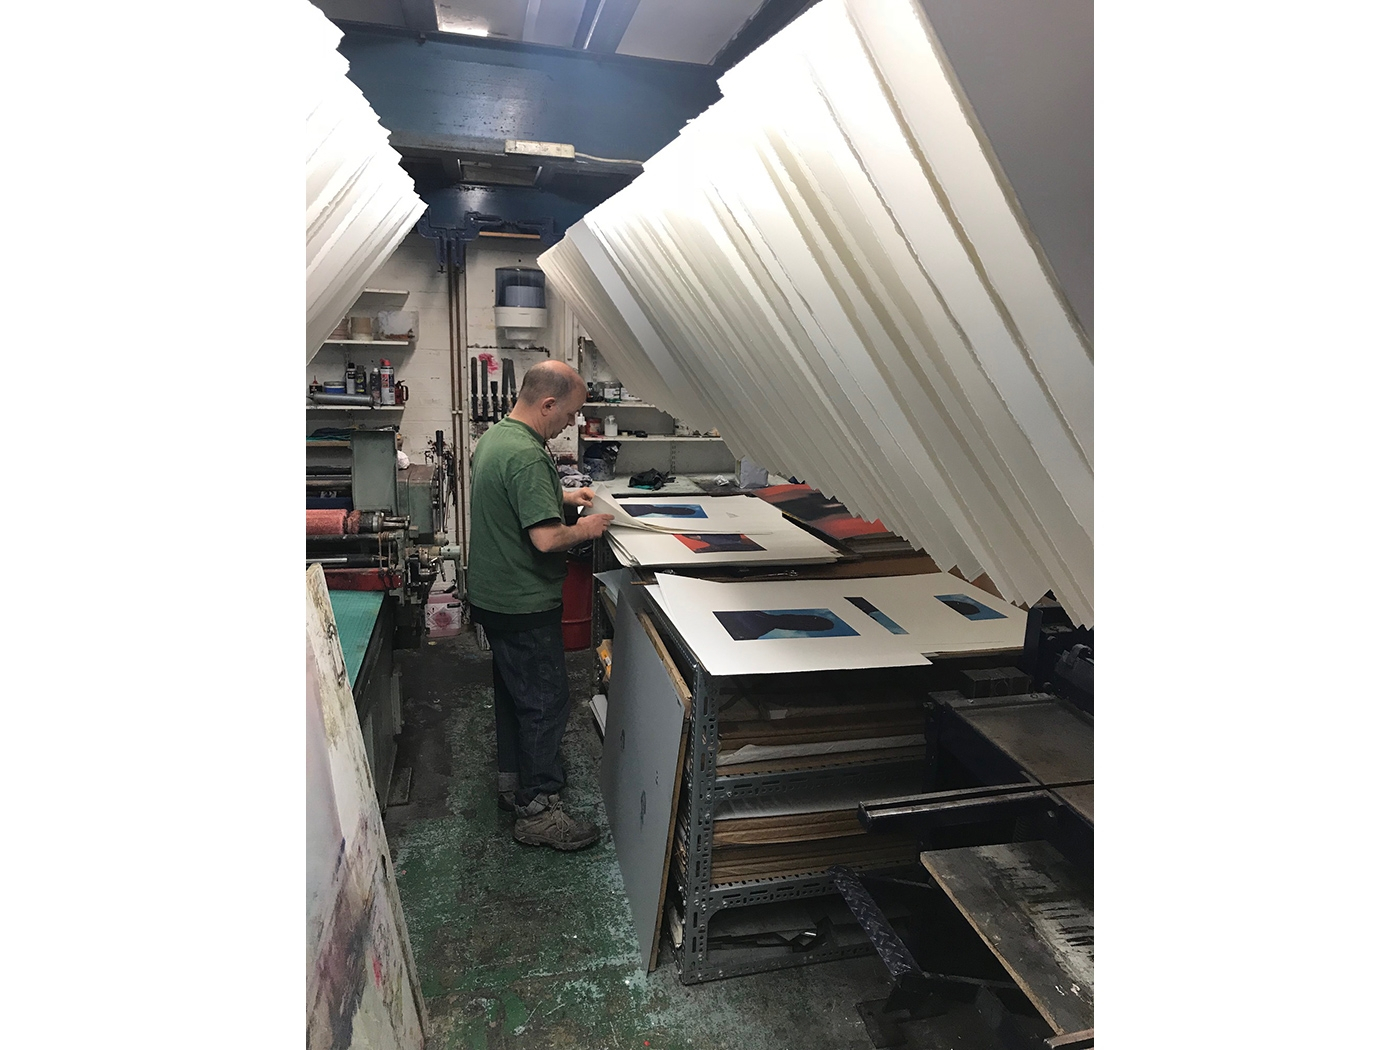 Mike Taylor inspecting each of the fine art lithographs at Pauper's Press, London.